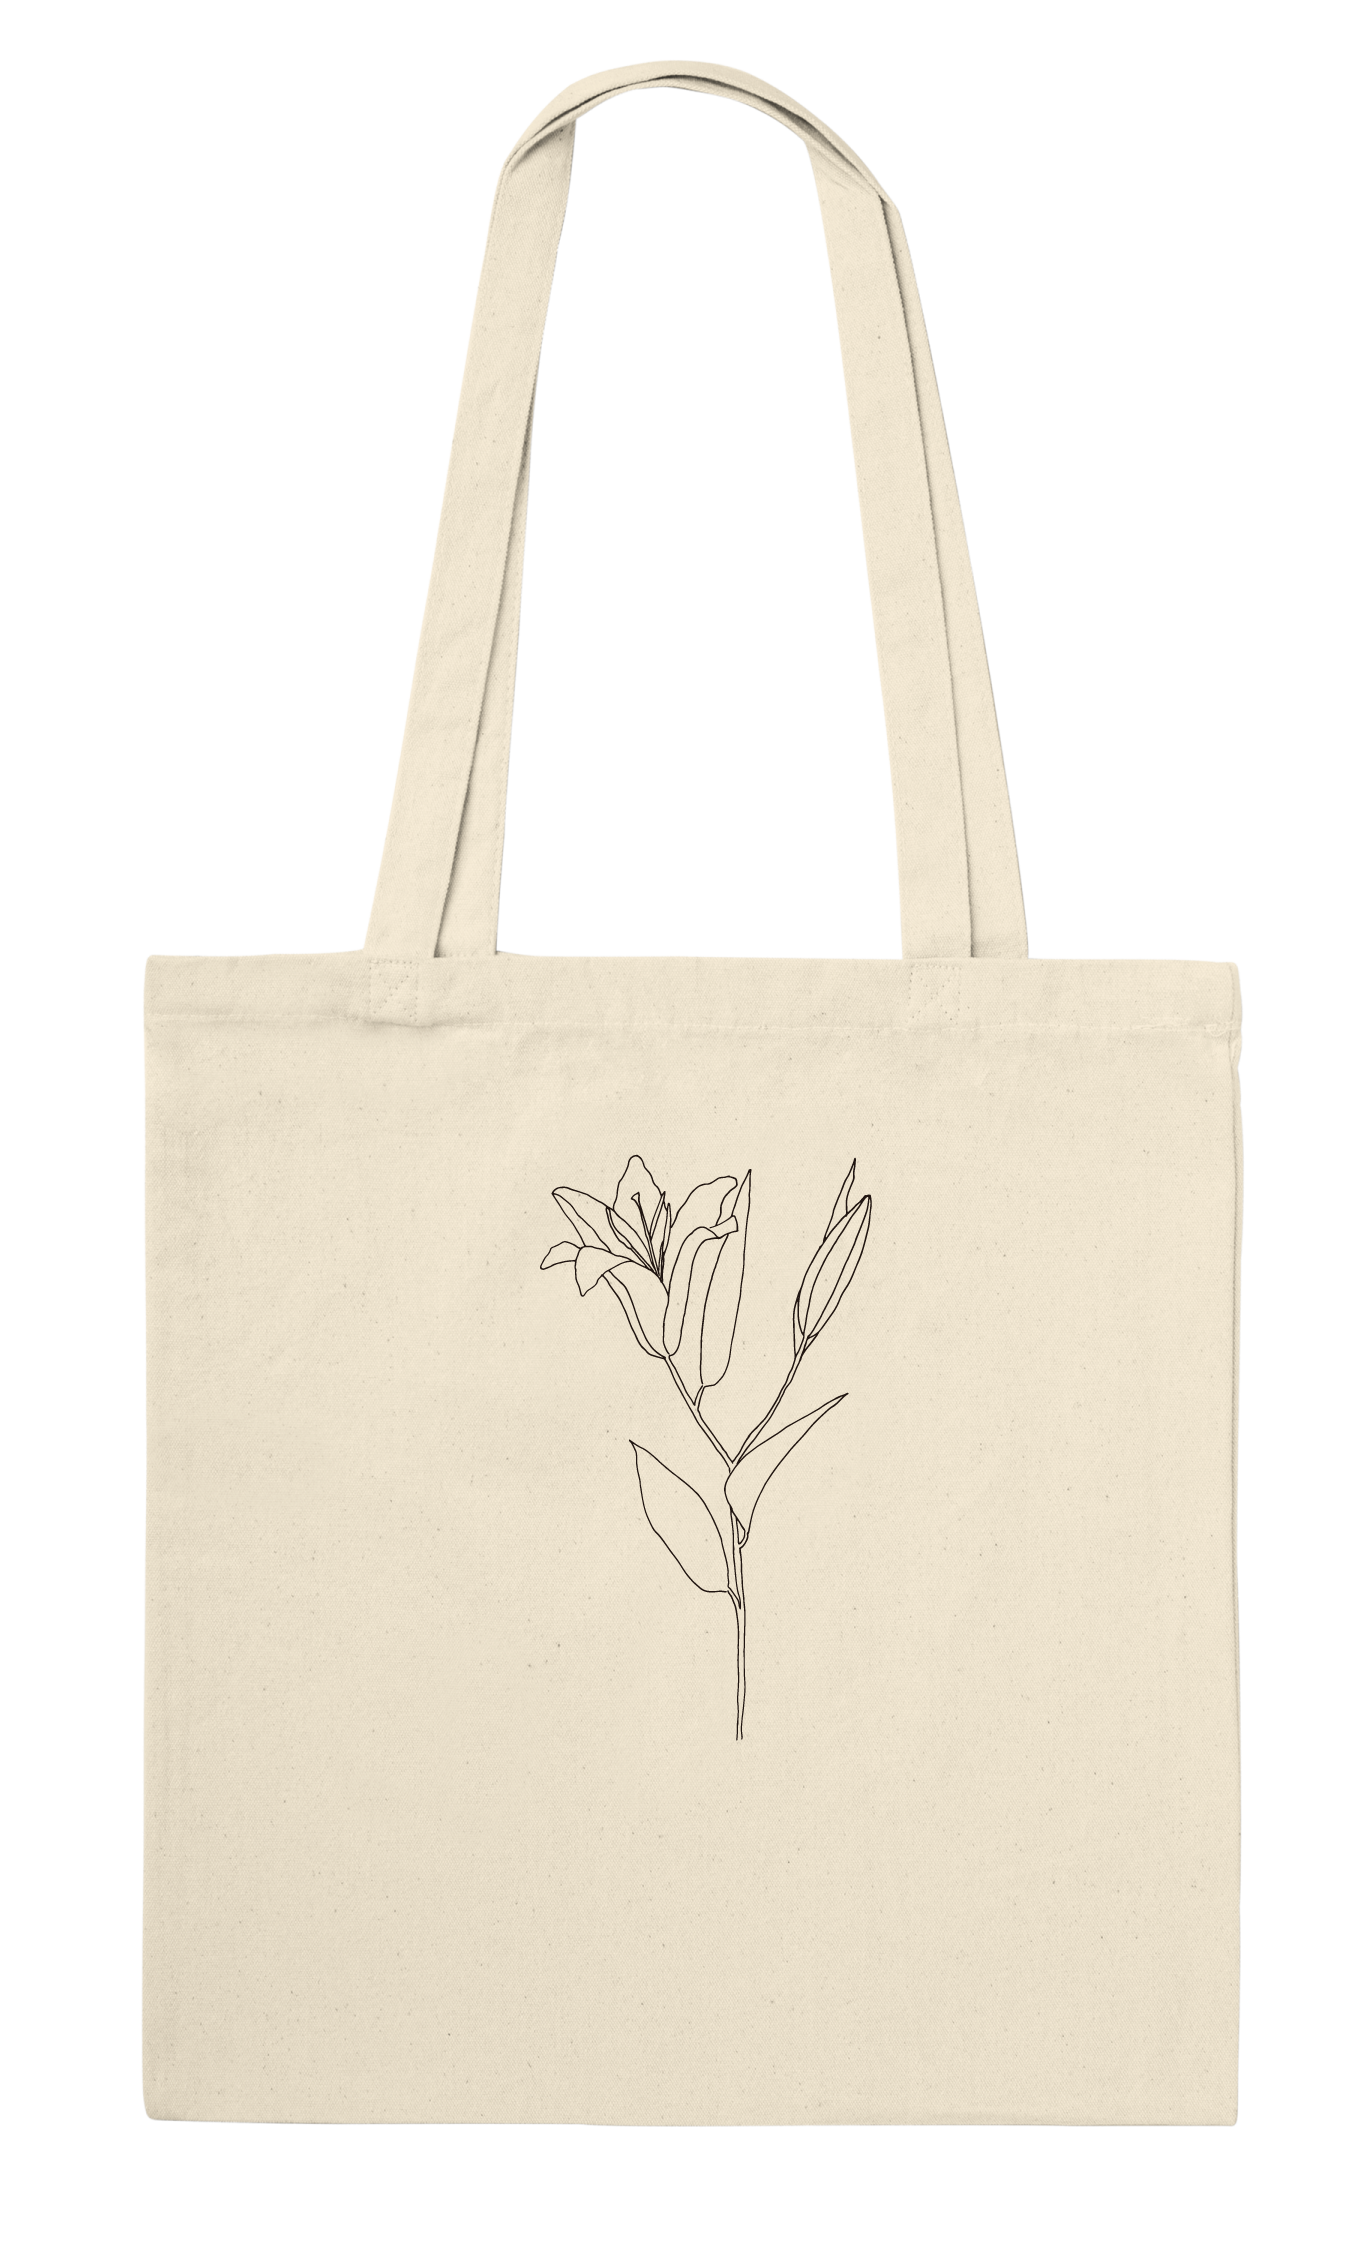 Lily Tote Bag -  リリートートバッグ